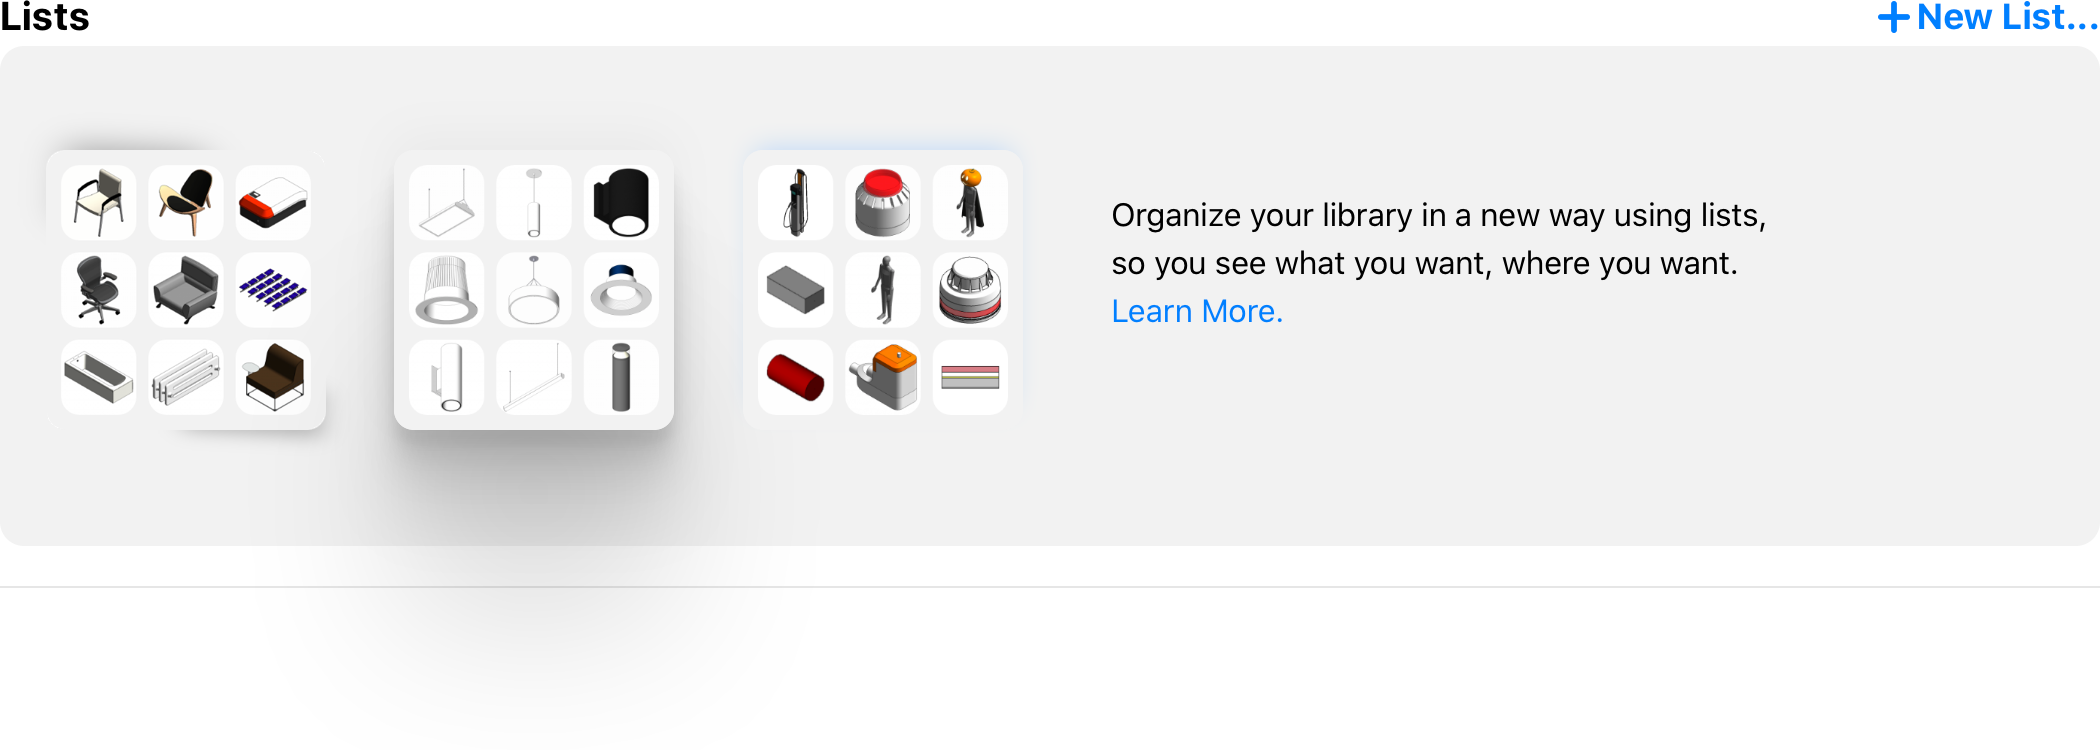 New Lists section on the Library landing page.